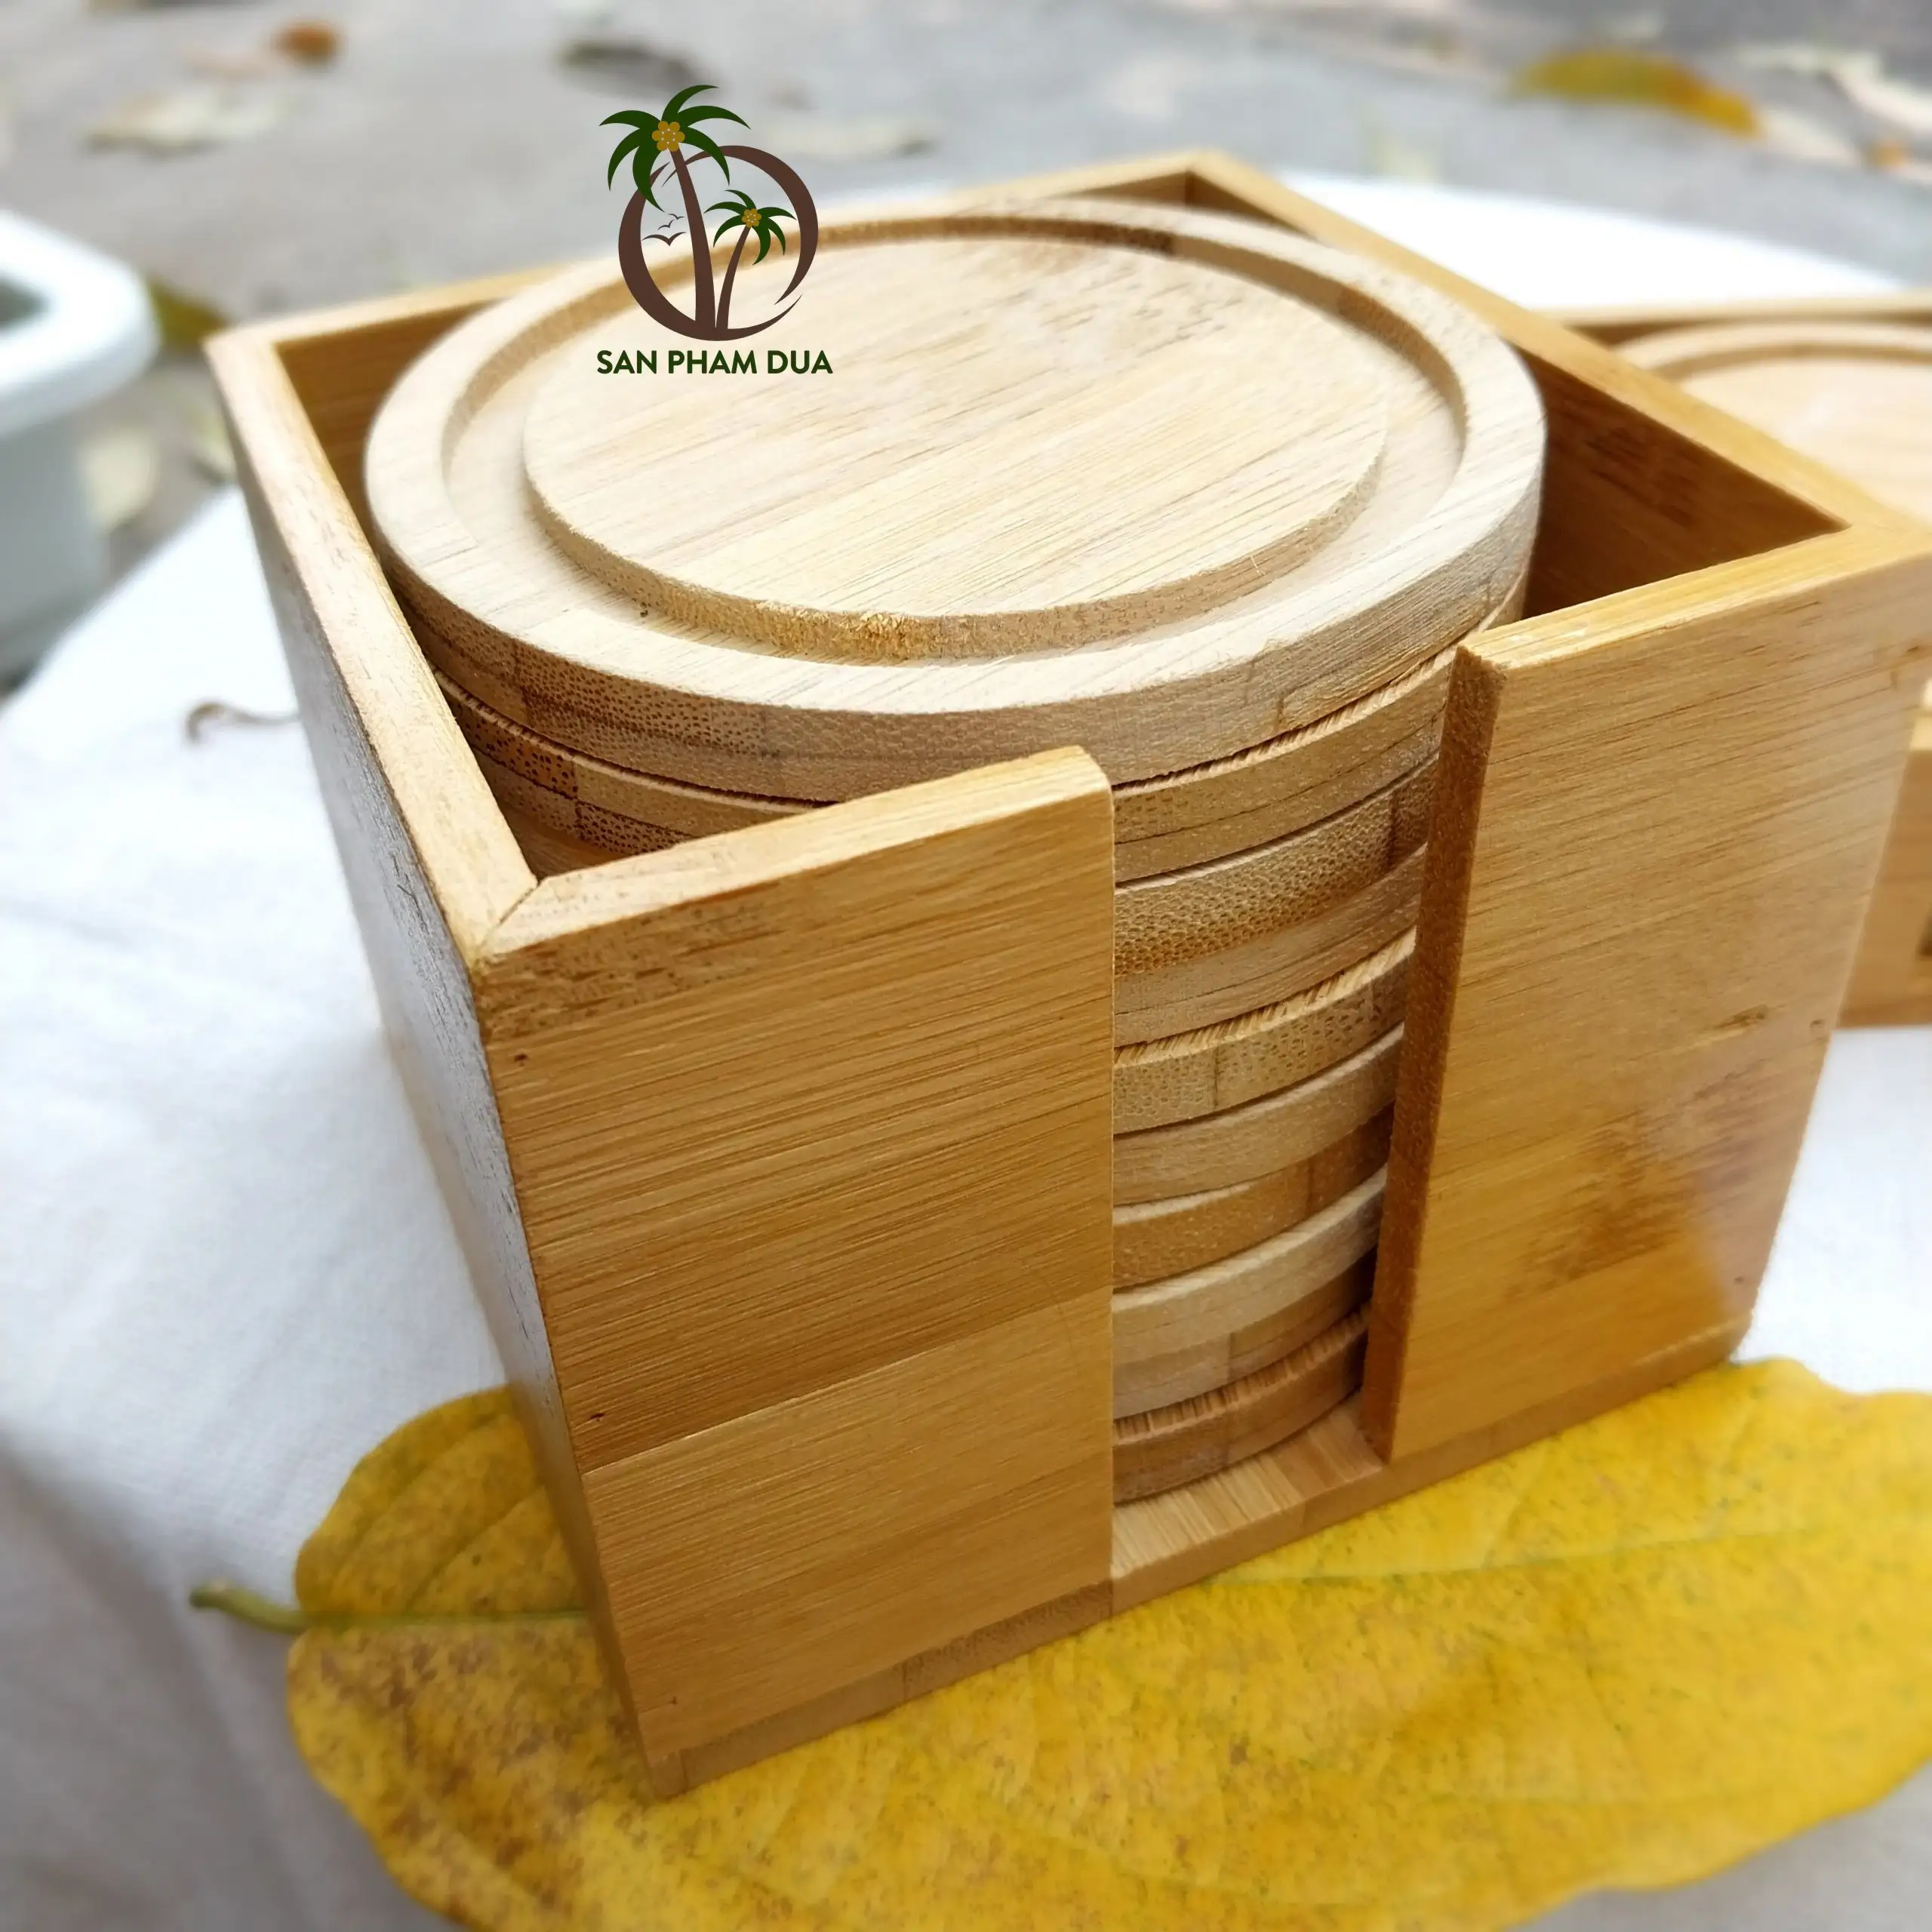 WHOLESALE BAMBOO COASTER/ BAMBOO COASTER SET/ ECO - FRIENDLY COASTER BAMBOO FOR CUP IN VIETNAM